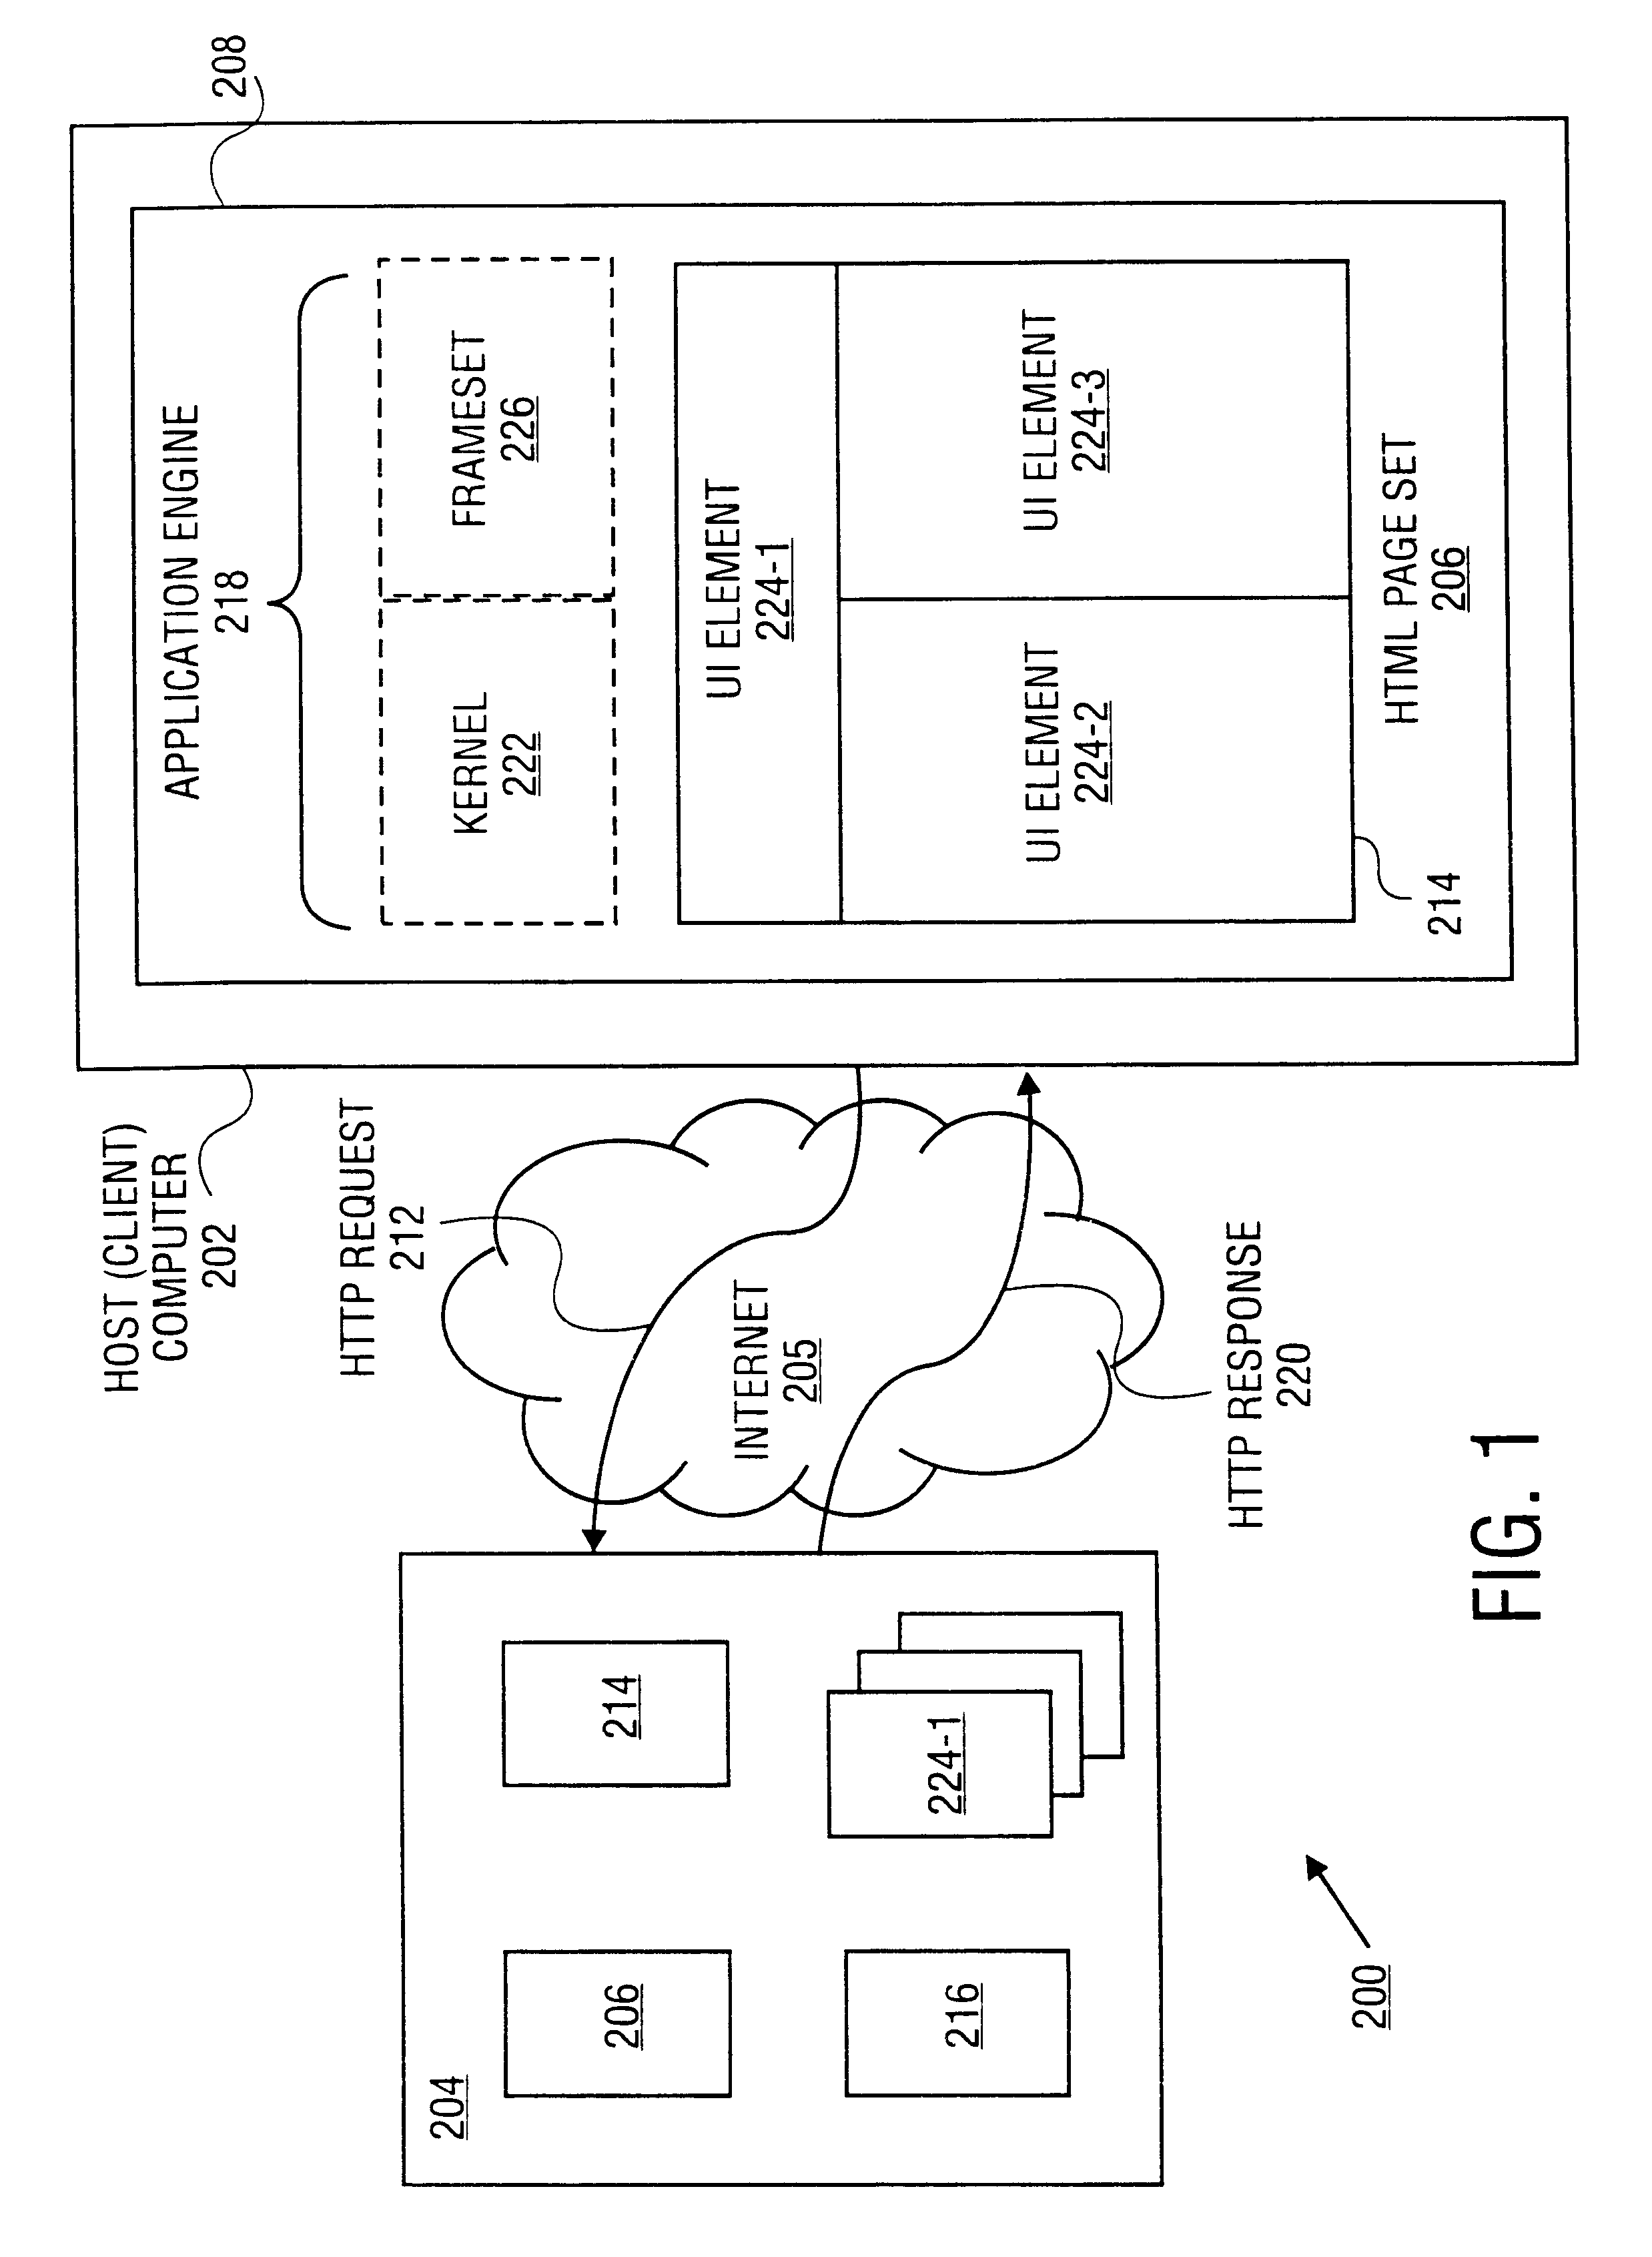 Methods and apparatus for interpreting user selections in the context of a relation distributed as a set of orthogonalized sub-relations